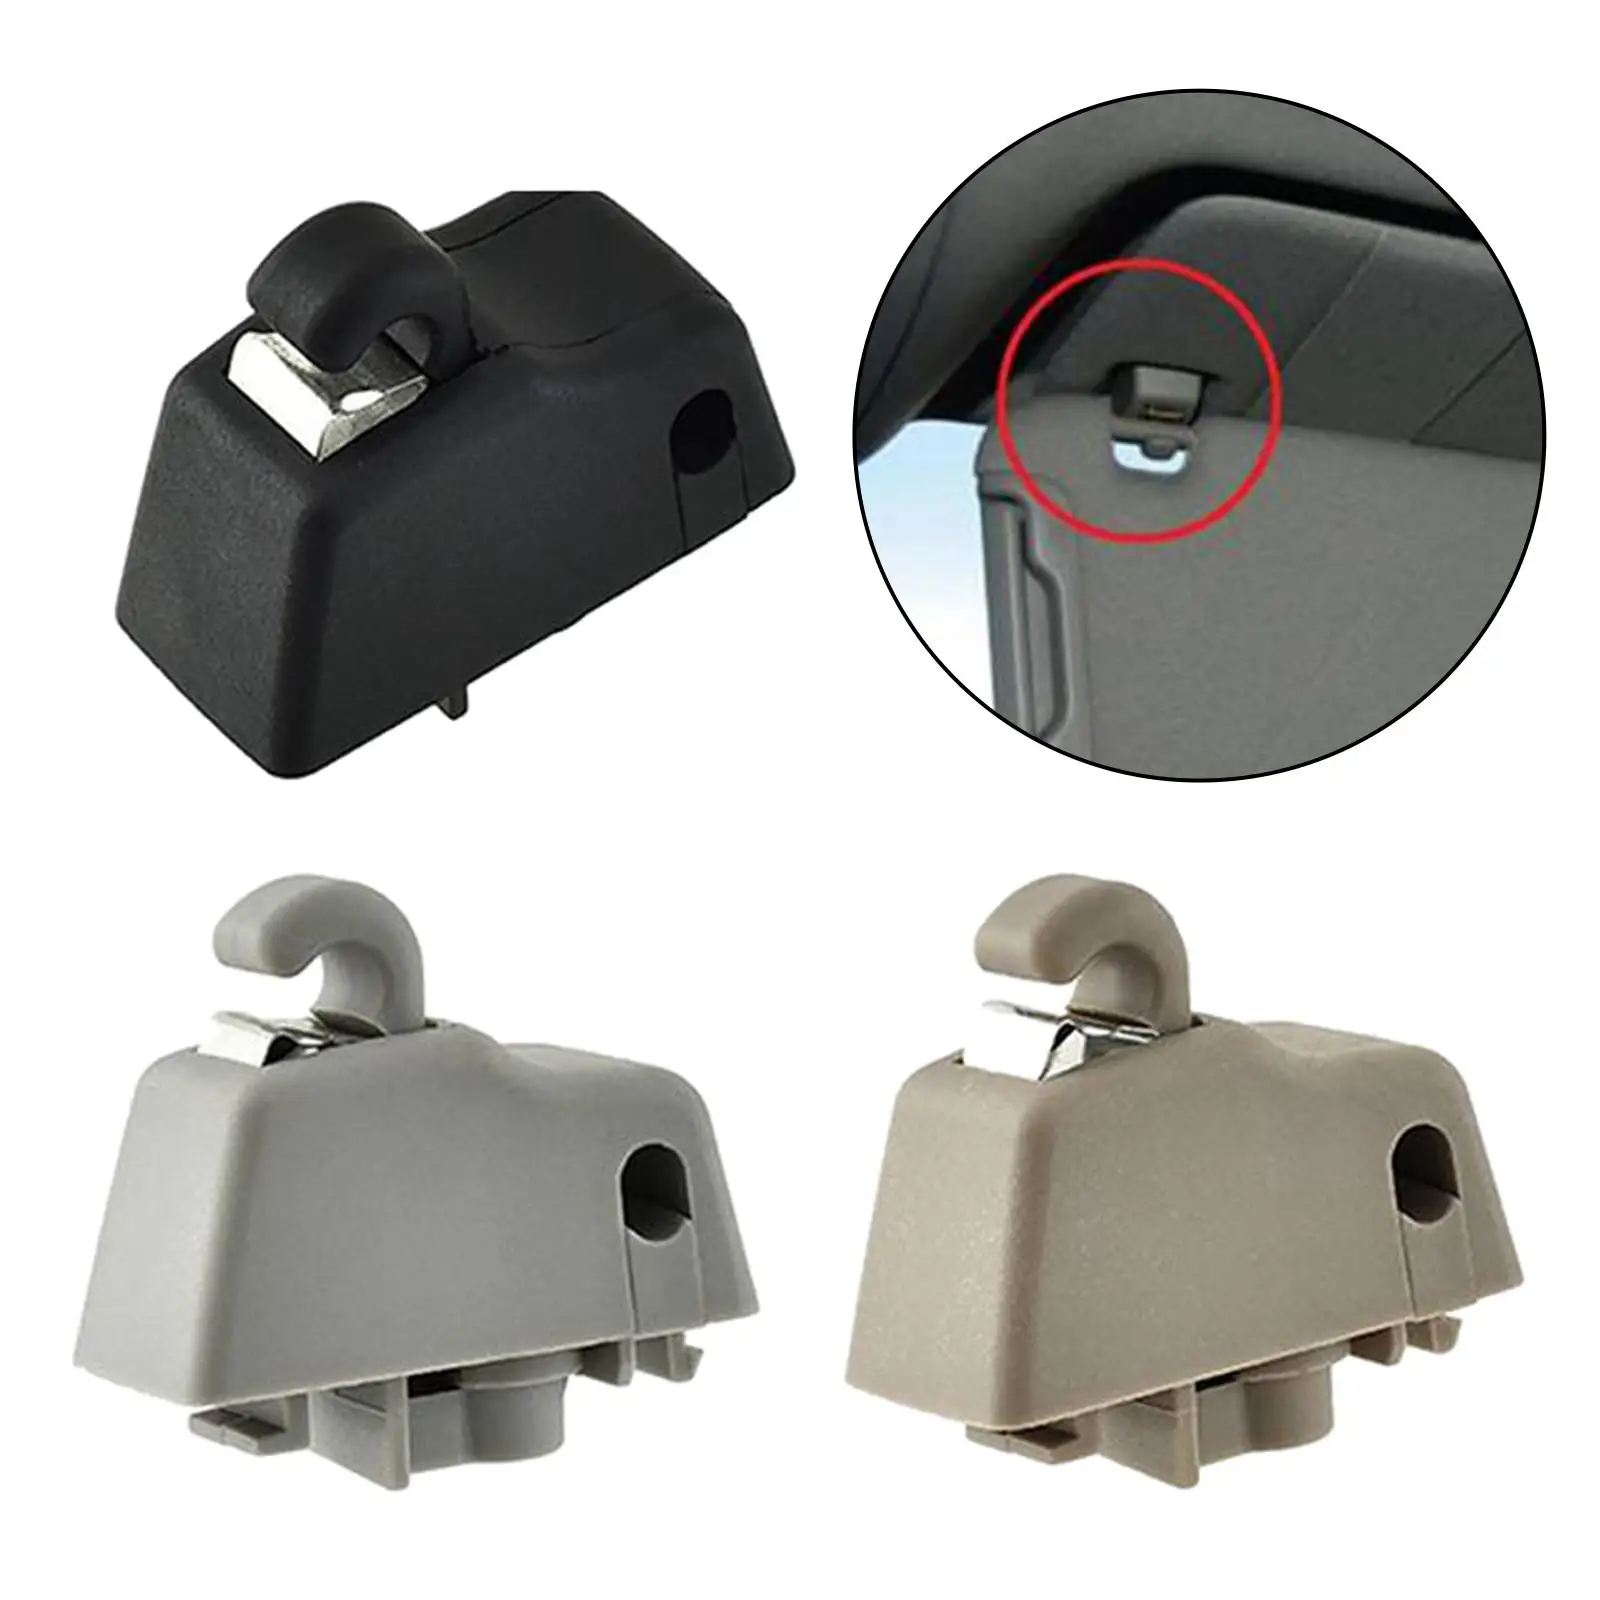 Sun Visor Retainer 4L0859561 Interior Parts Mounting Holder Durable Easy to Install Fixed Buckle for VW Touareg